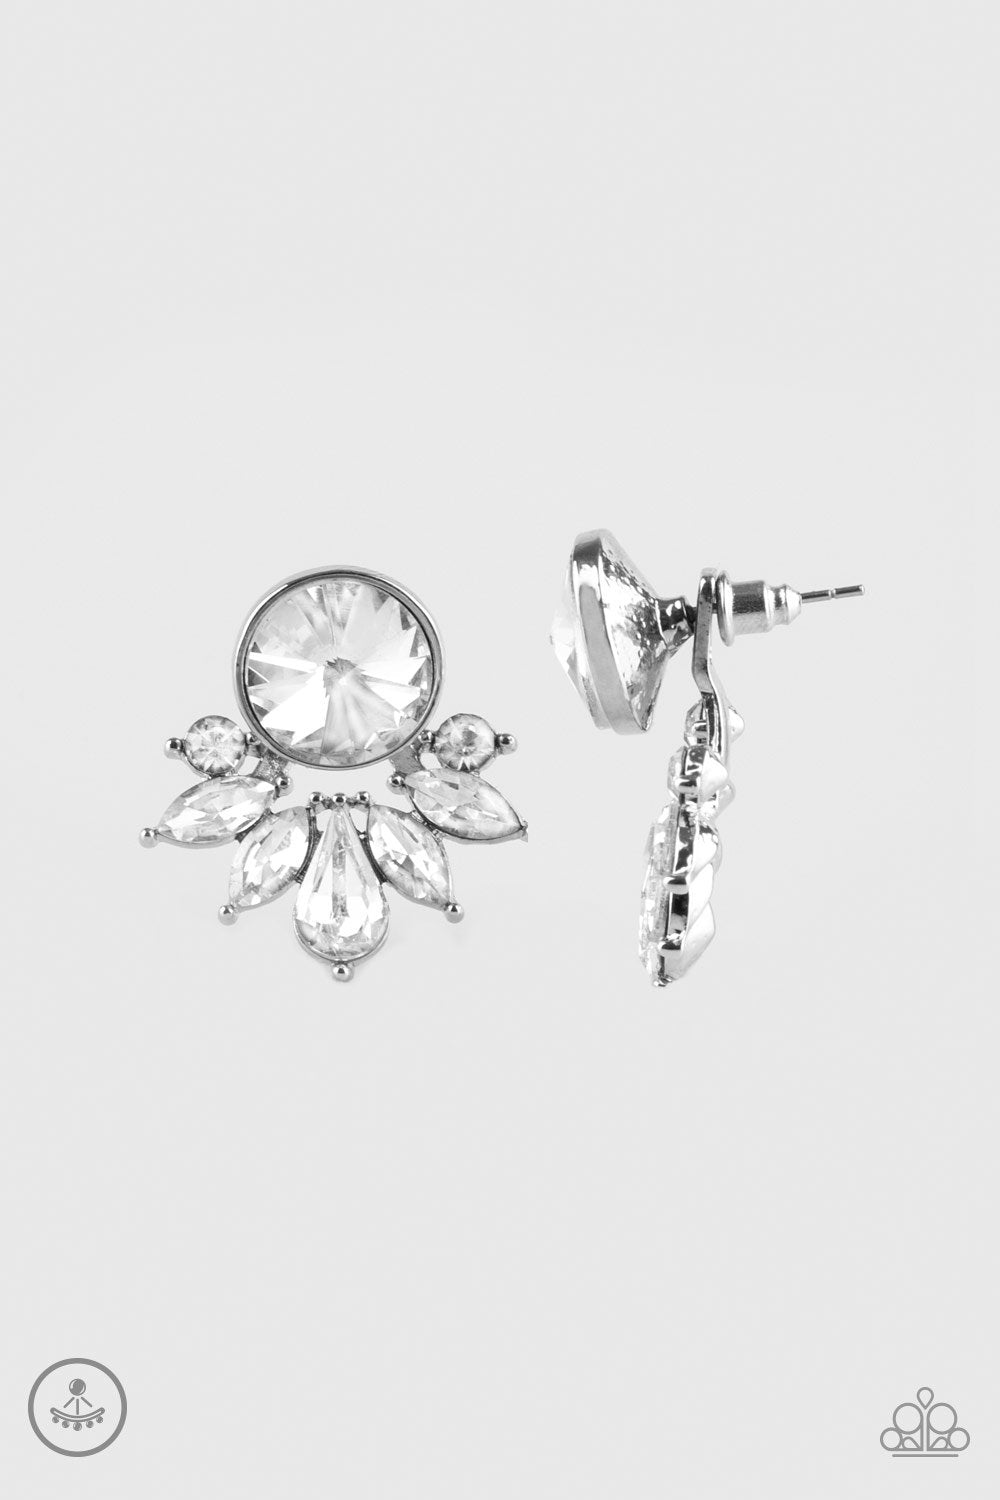 Paparazzi Accessories Radically Royal - White Rhinestone Double Sided Earrings - Lady T Accessories